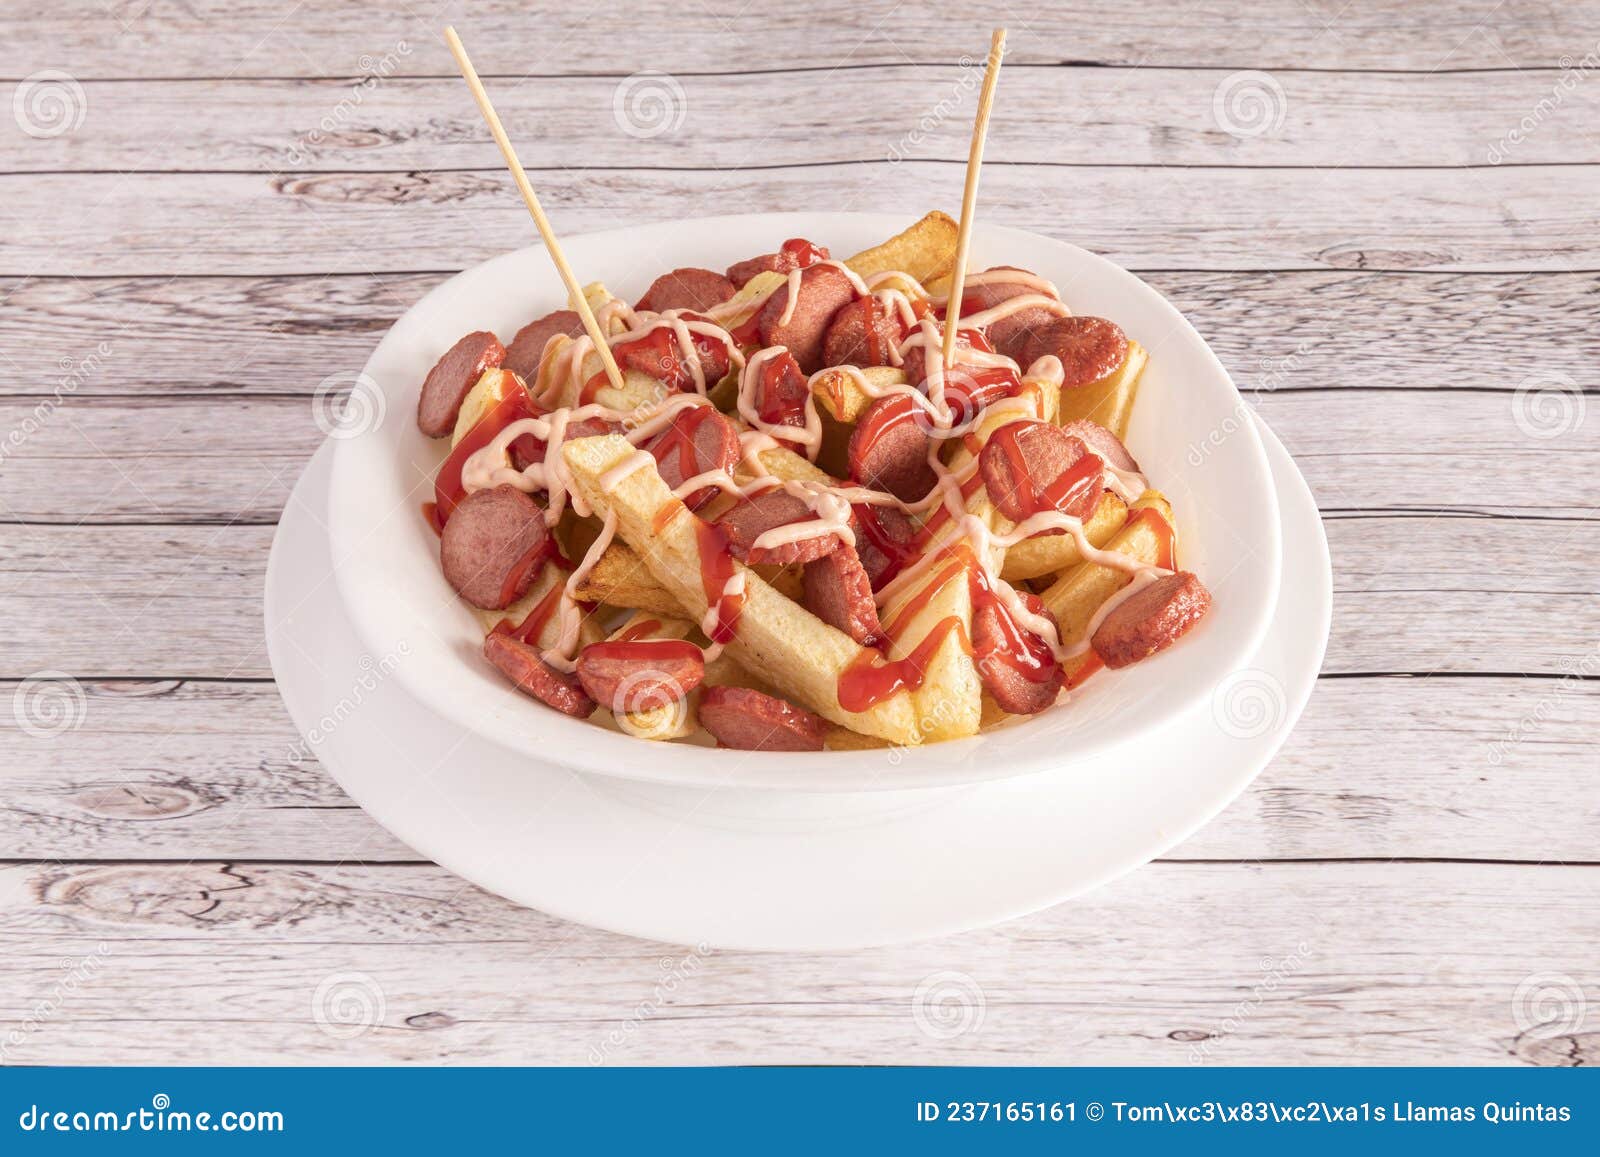 salchipapa a fast food consisting of fried slices of sausage and french fries, consumed as street food in latin america